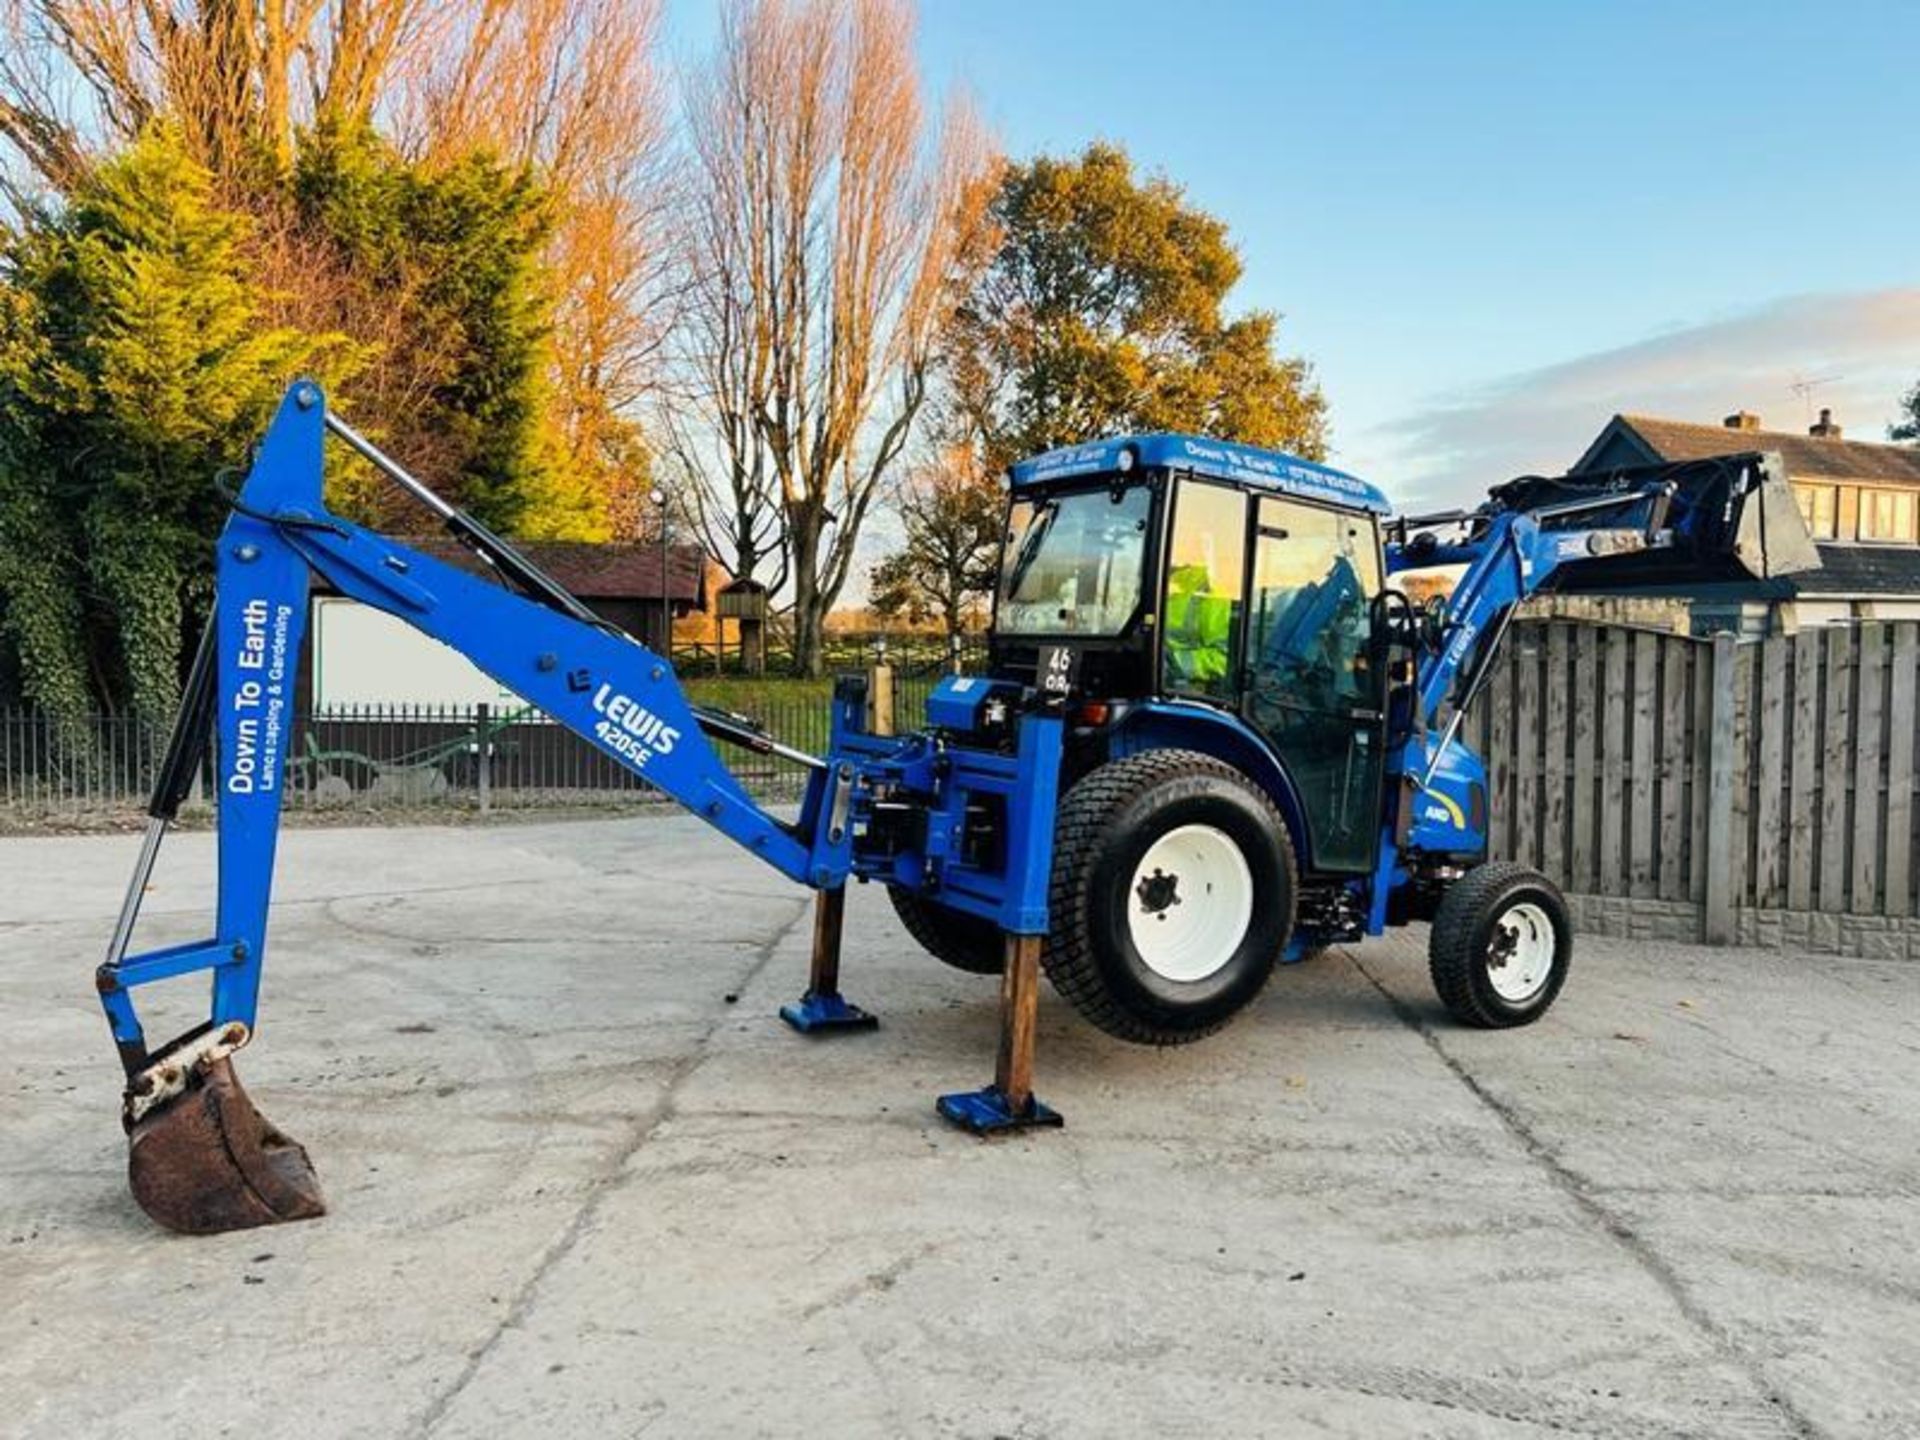 NEW HOLLAND BOOMER 40 4WD TRACTOR *YEAR 2014, ONLY 737 HRS* C/W LOADER & BACK TRACTOR - Image 7 of 19